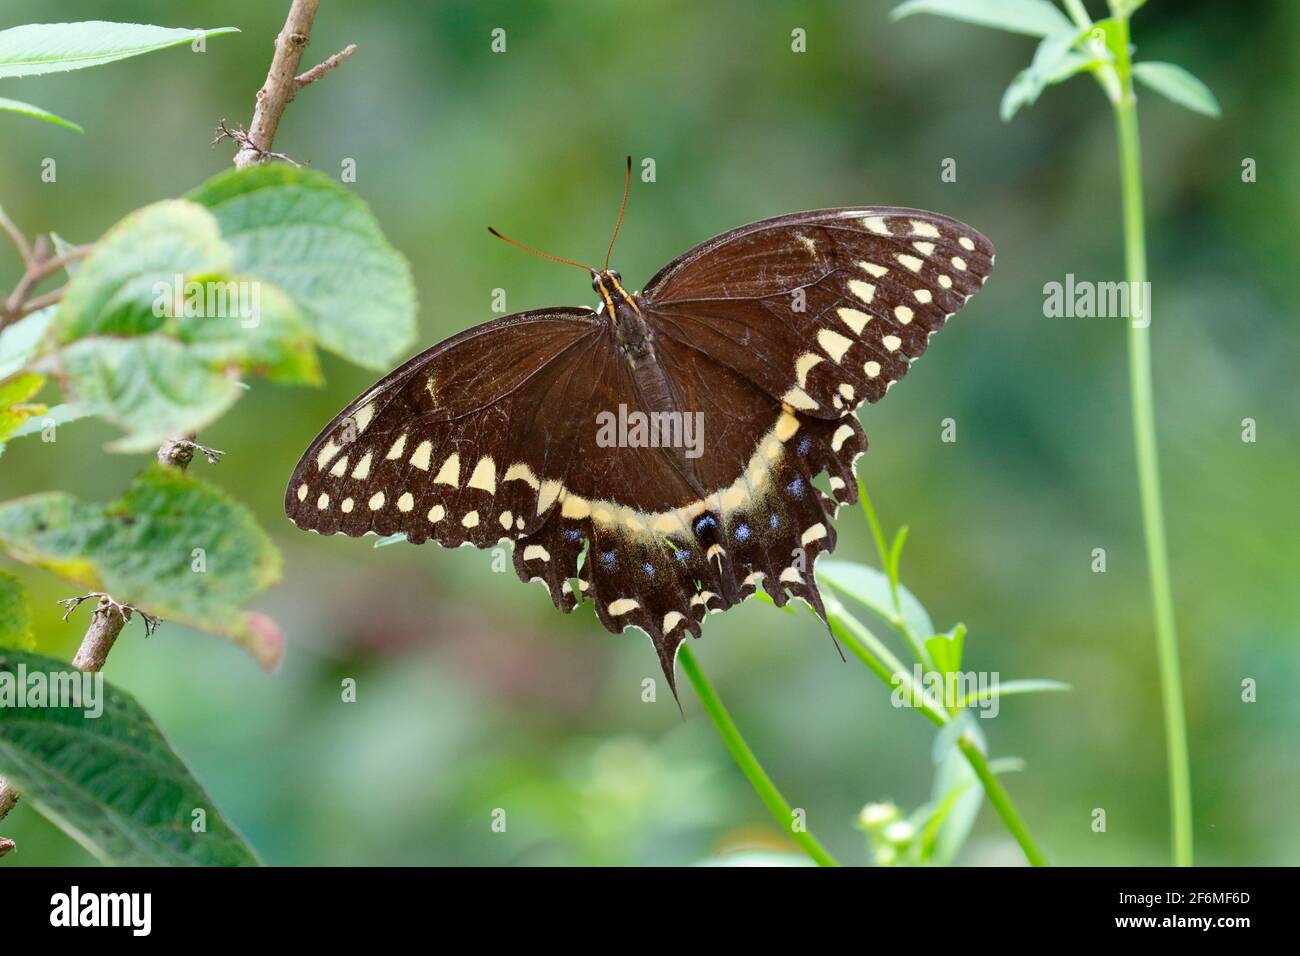 A Palamedes swallowtail, Papilio palamedes, nectaring a daisy flower. Stock Photo